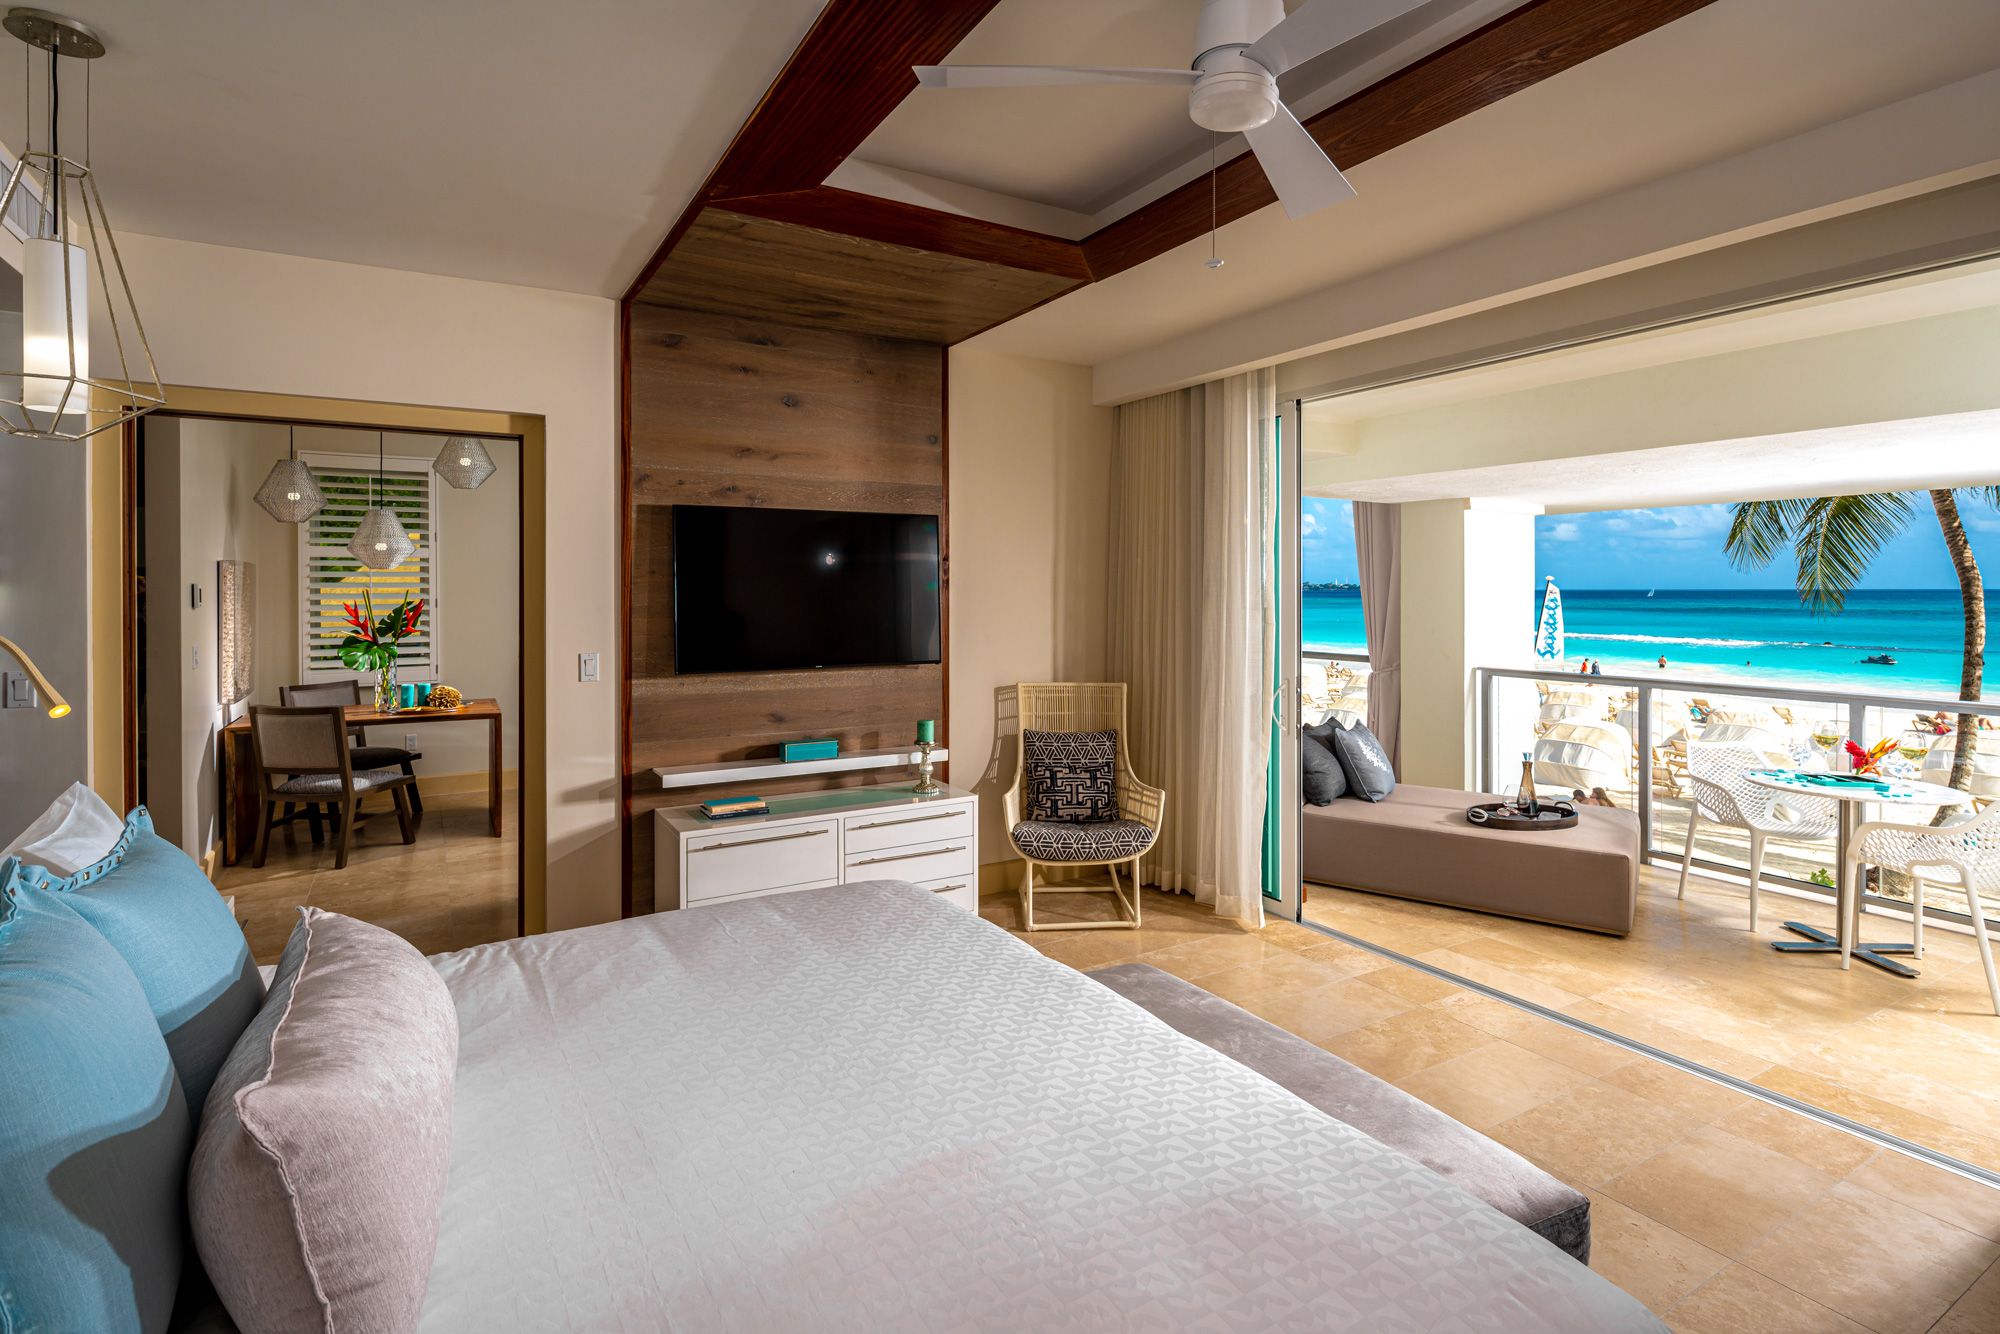 Sandals-Royal-Barbados-Beachfront-Butler-Suite-with-Balcony-Tranquility-Soaking-Tub-Room